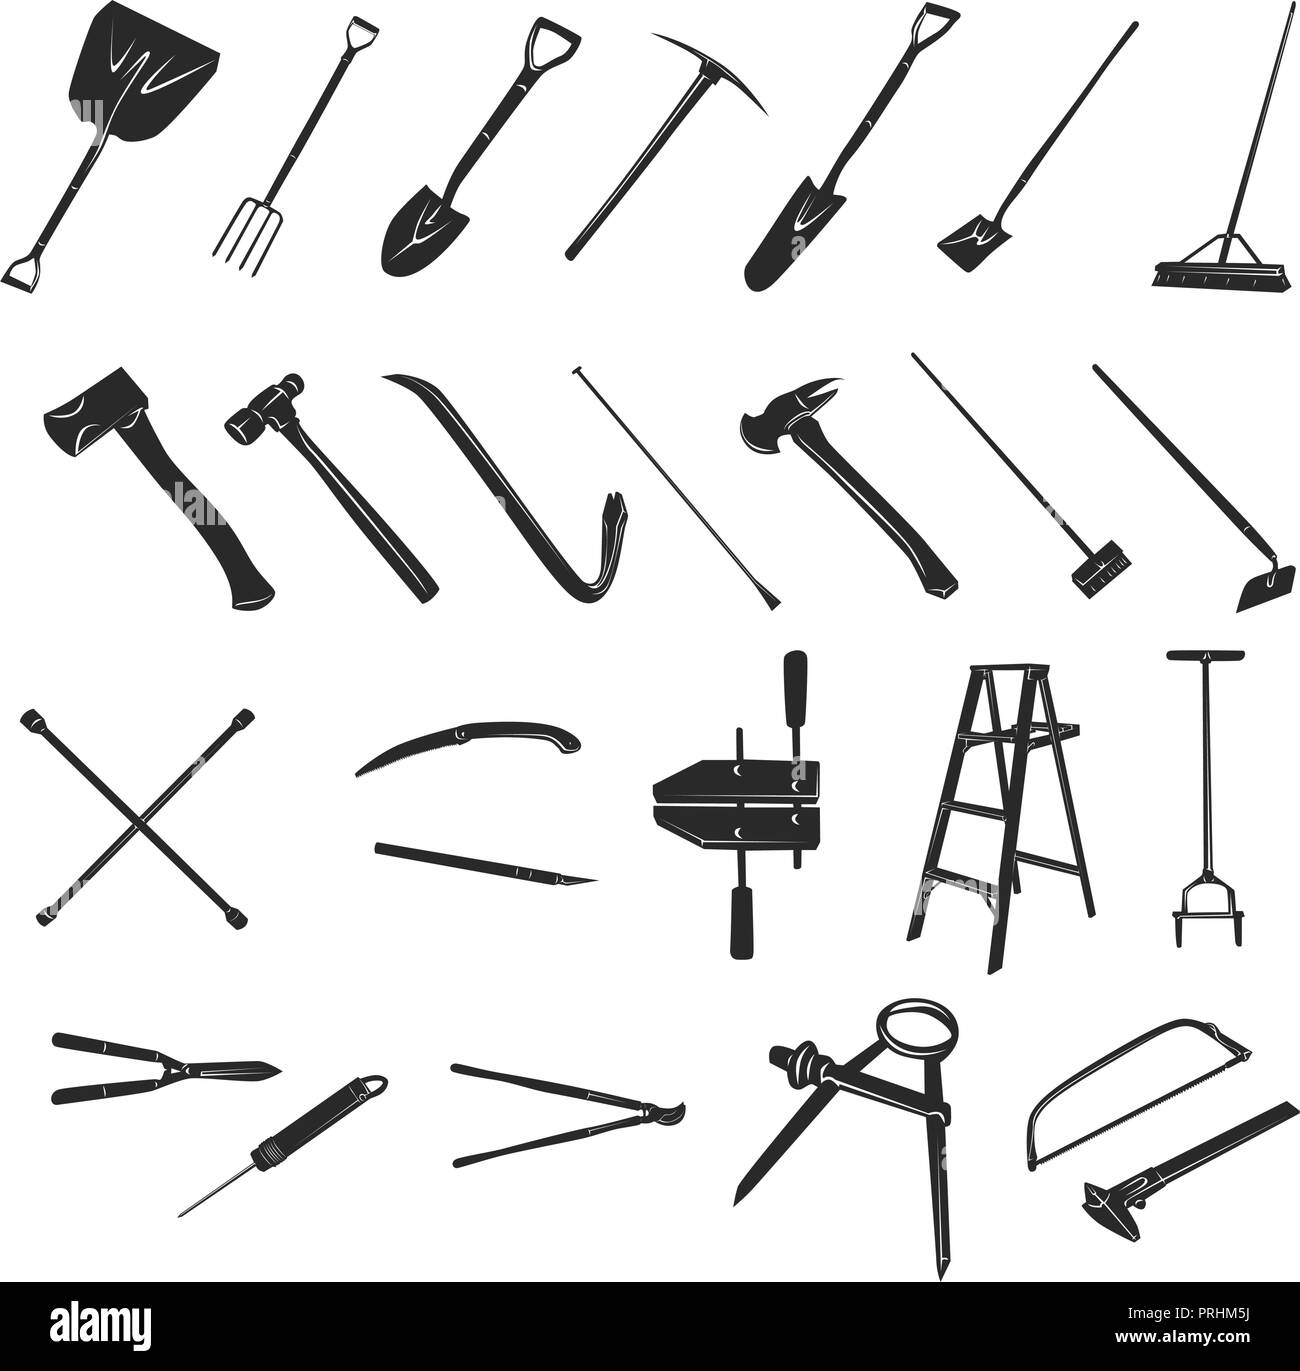 Gardening tools collection - vector silhouette Stock Vector